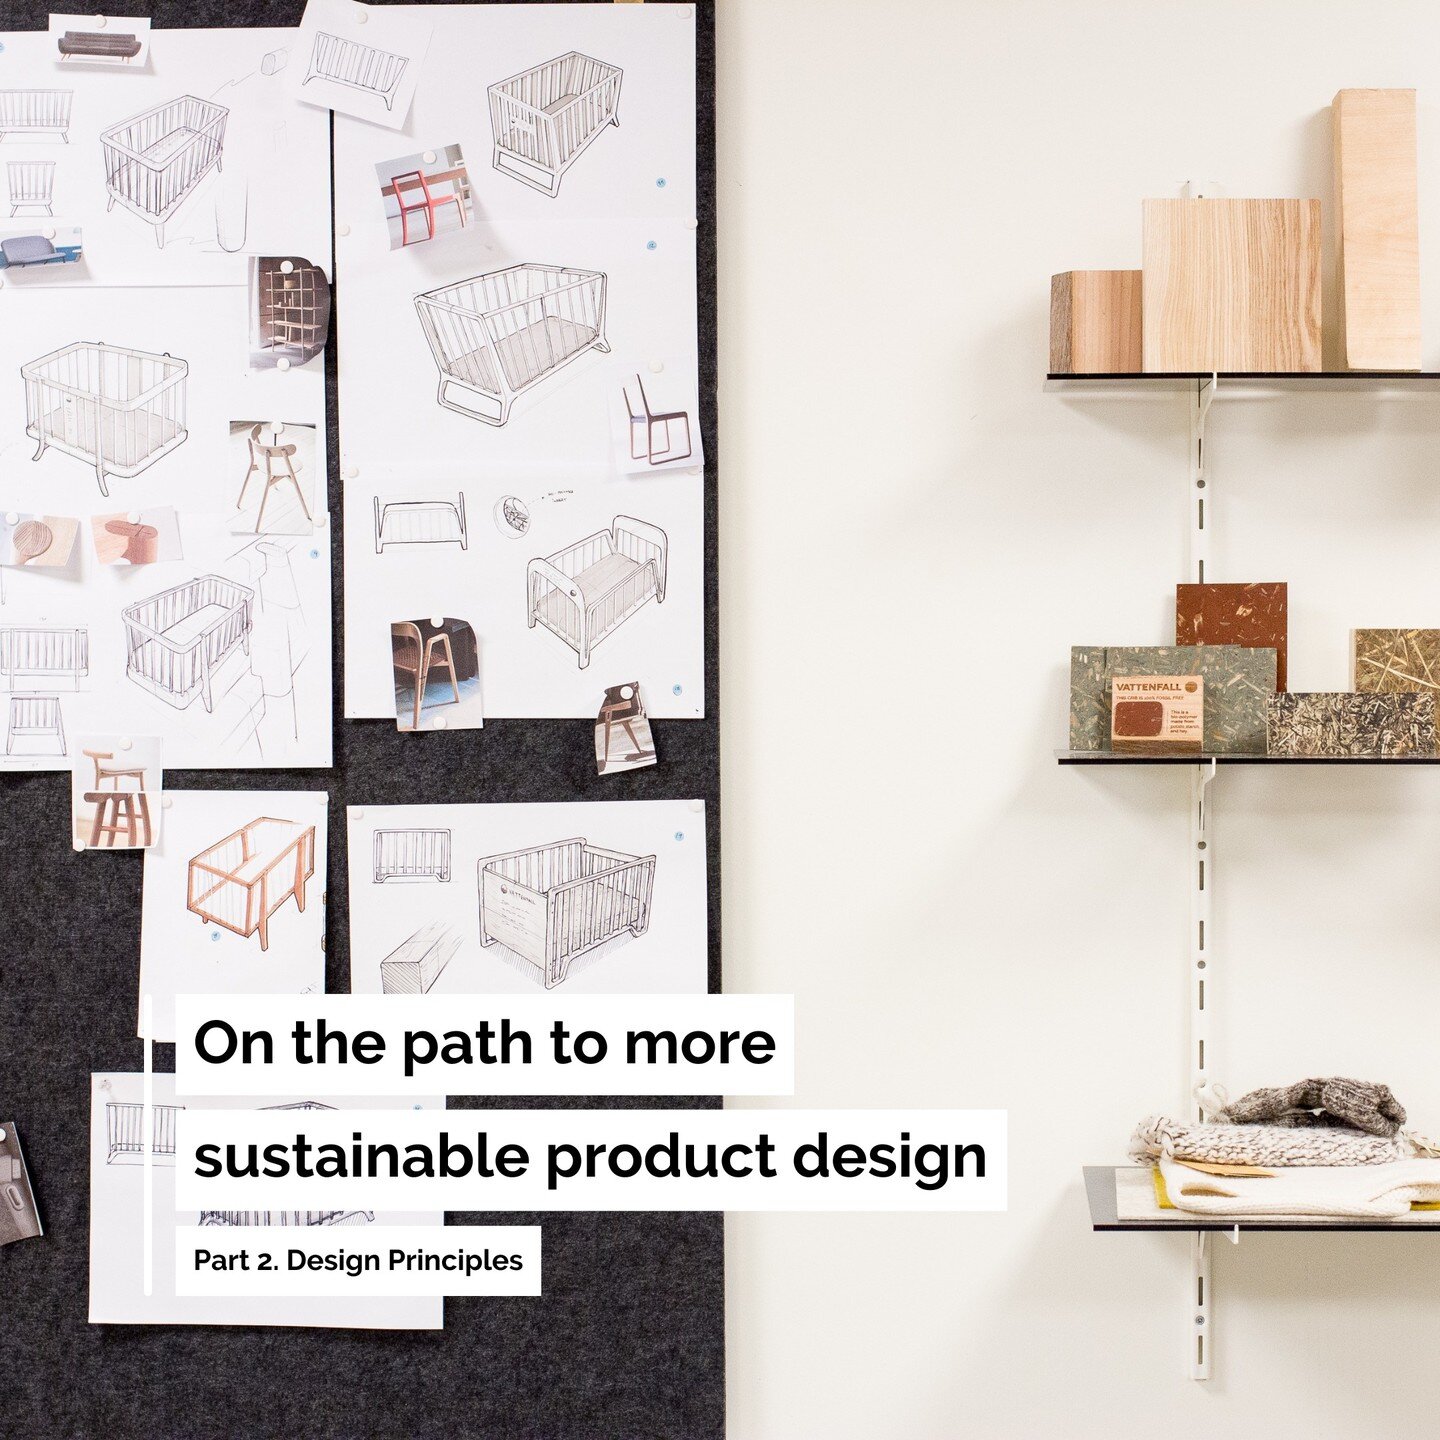 When designing for sustainability, we are asked to introduce an additional dimension. Designing successful sustainable products requires designing harm out already during the design process, before it even happens.

But how can we do this in practice